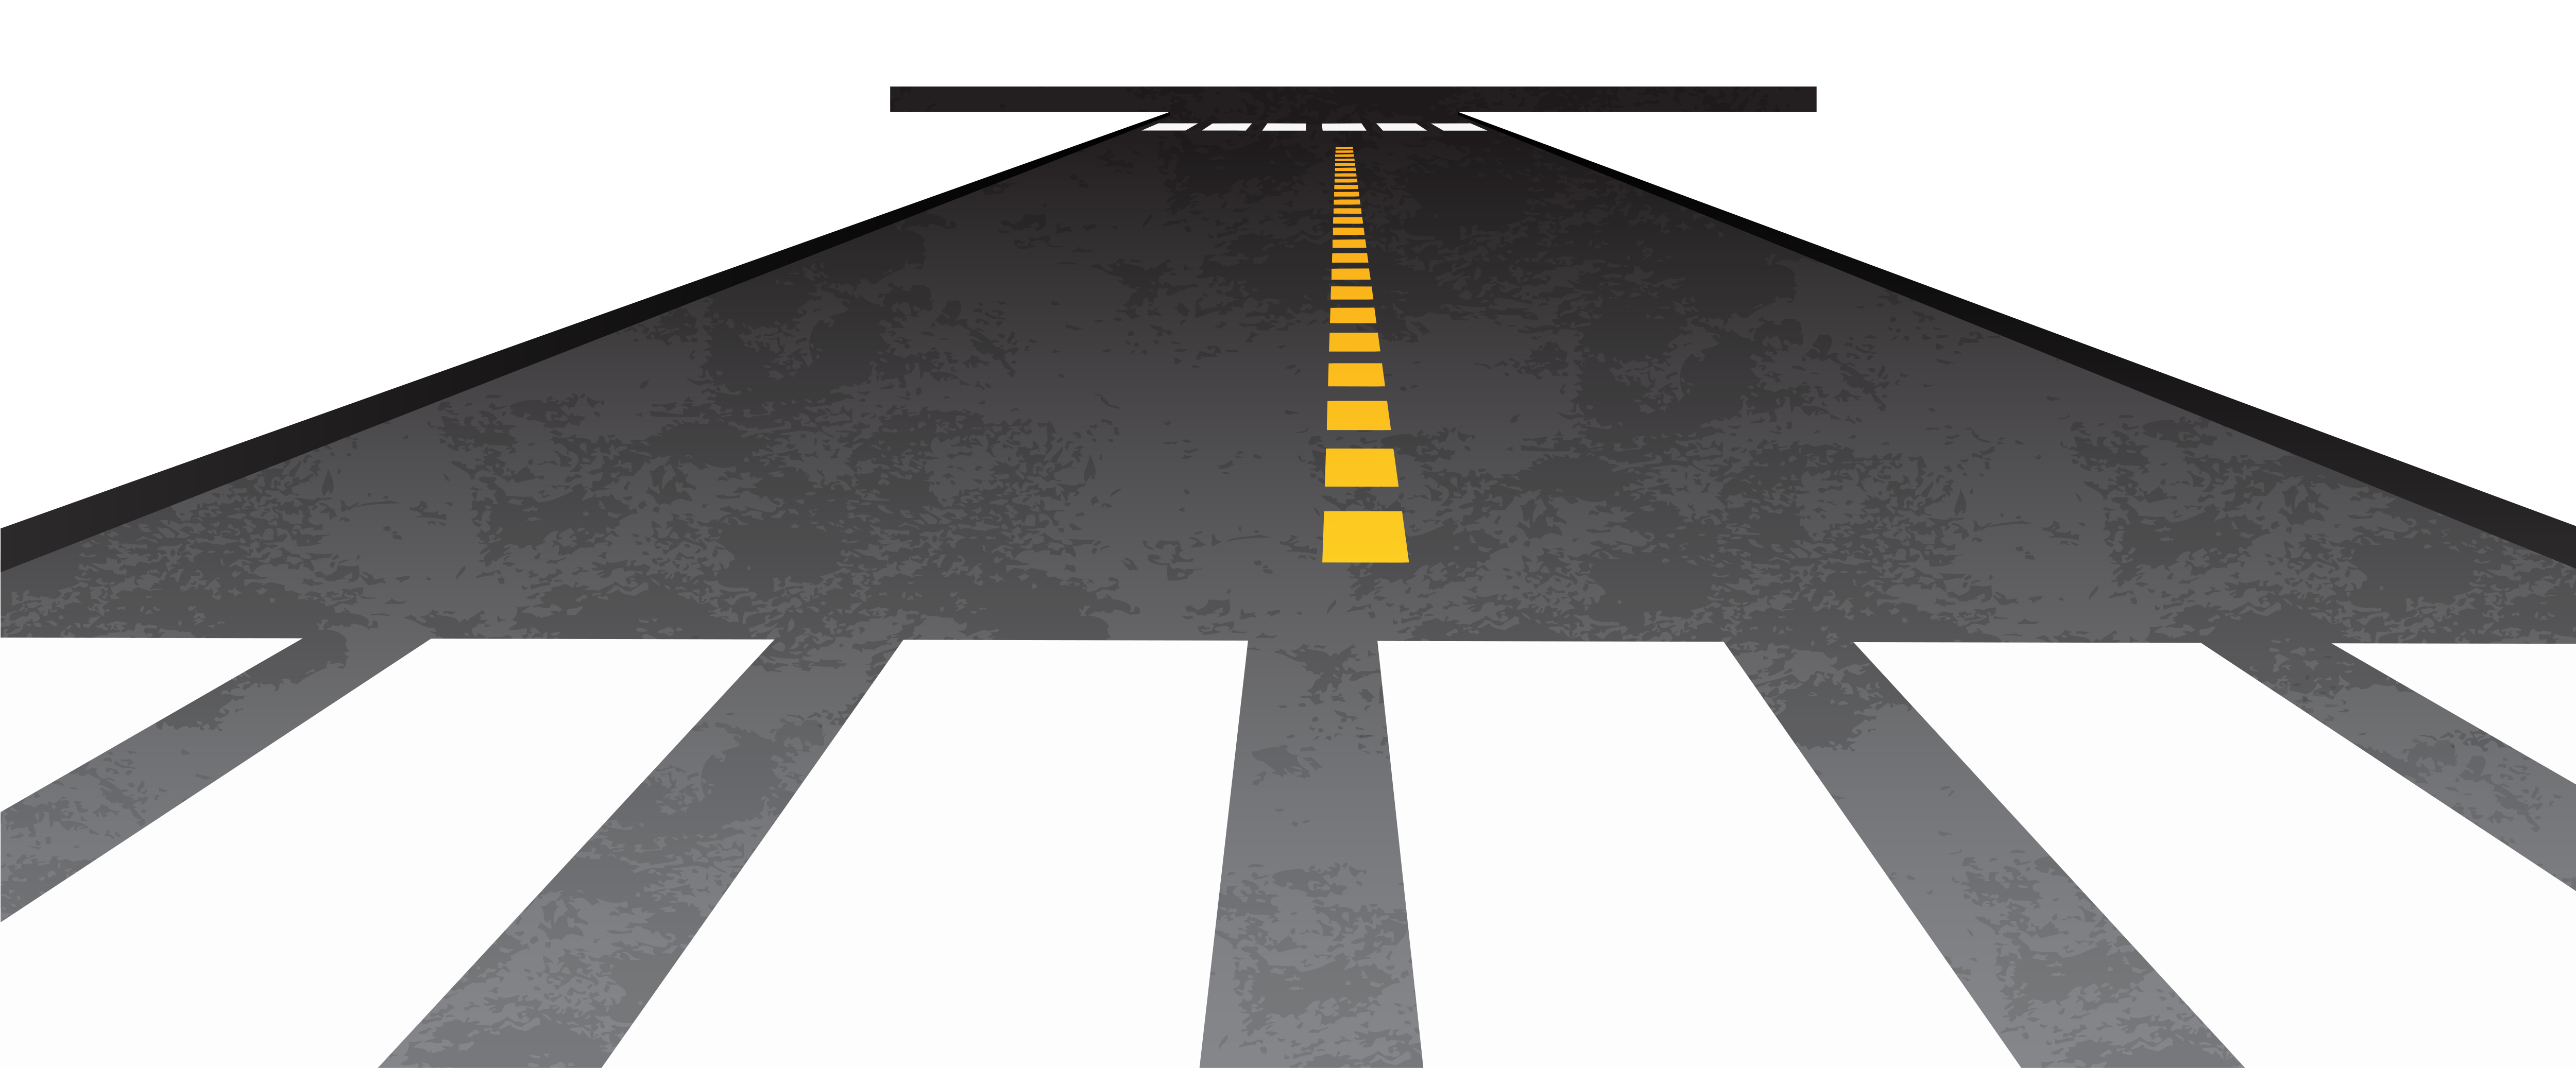 Png images highway download. Clipart road infrastructure